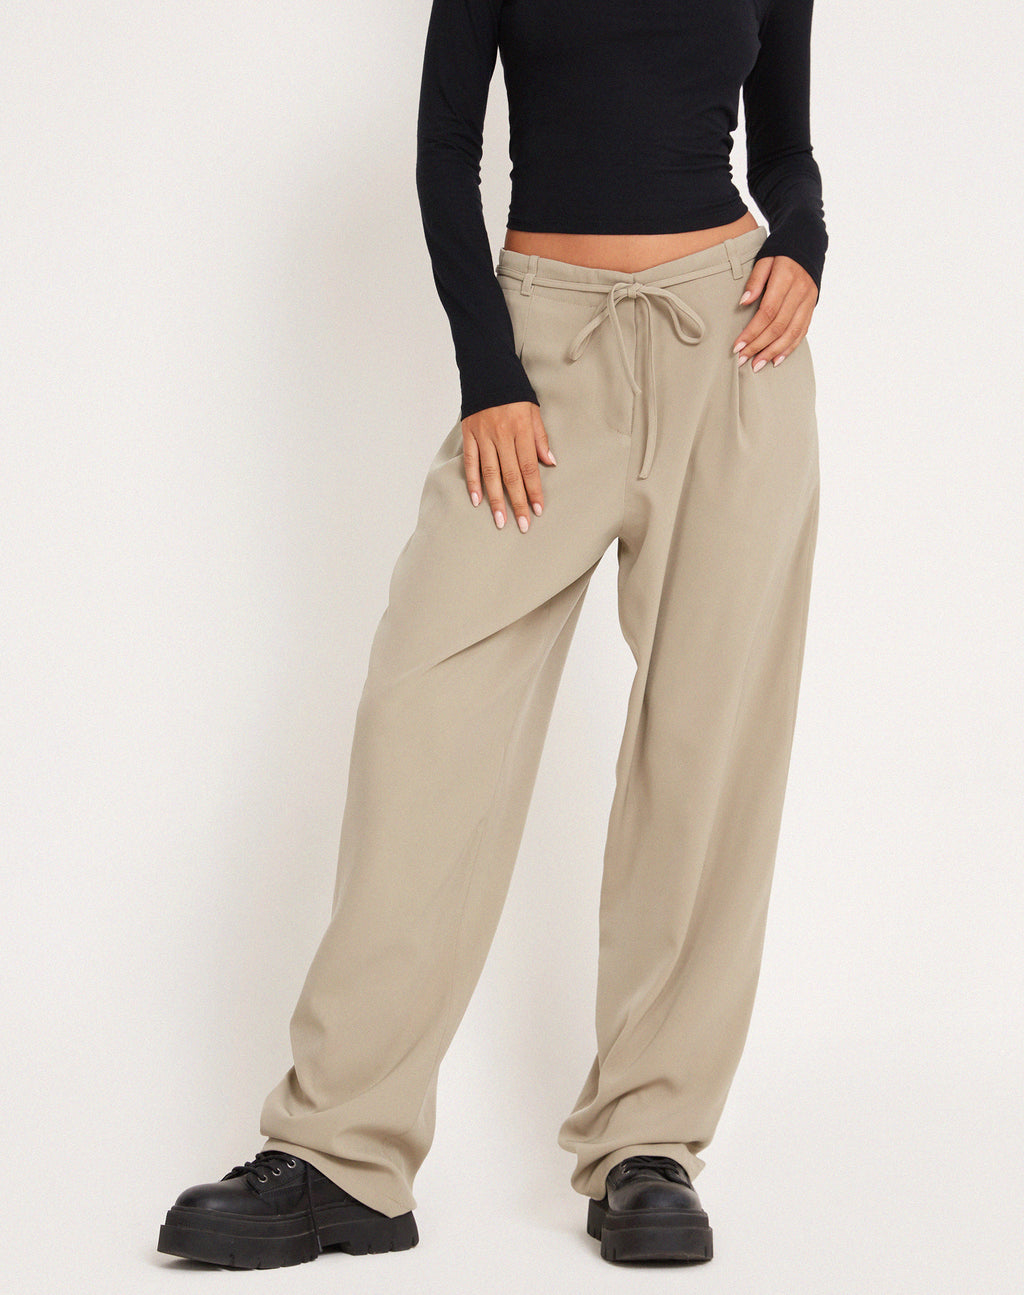 Sabria Trouser in Tailoring Taupe